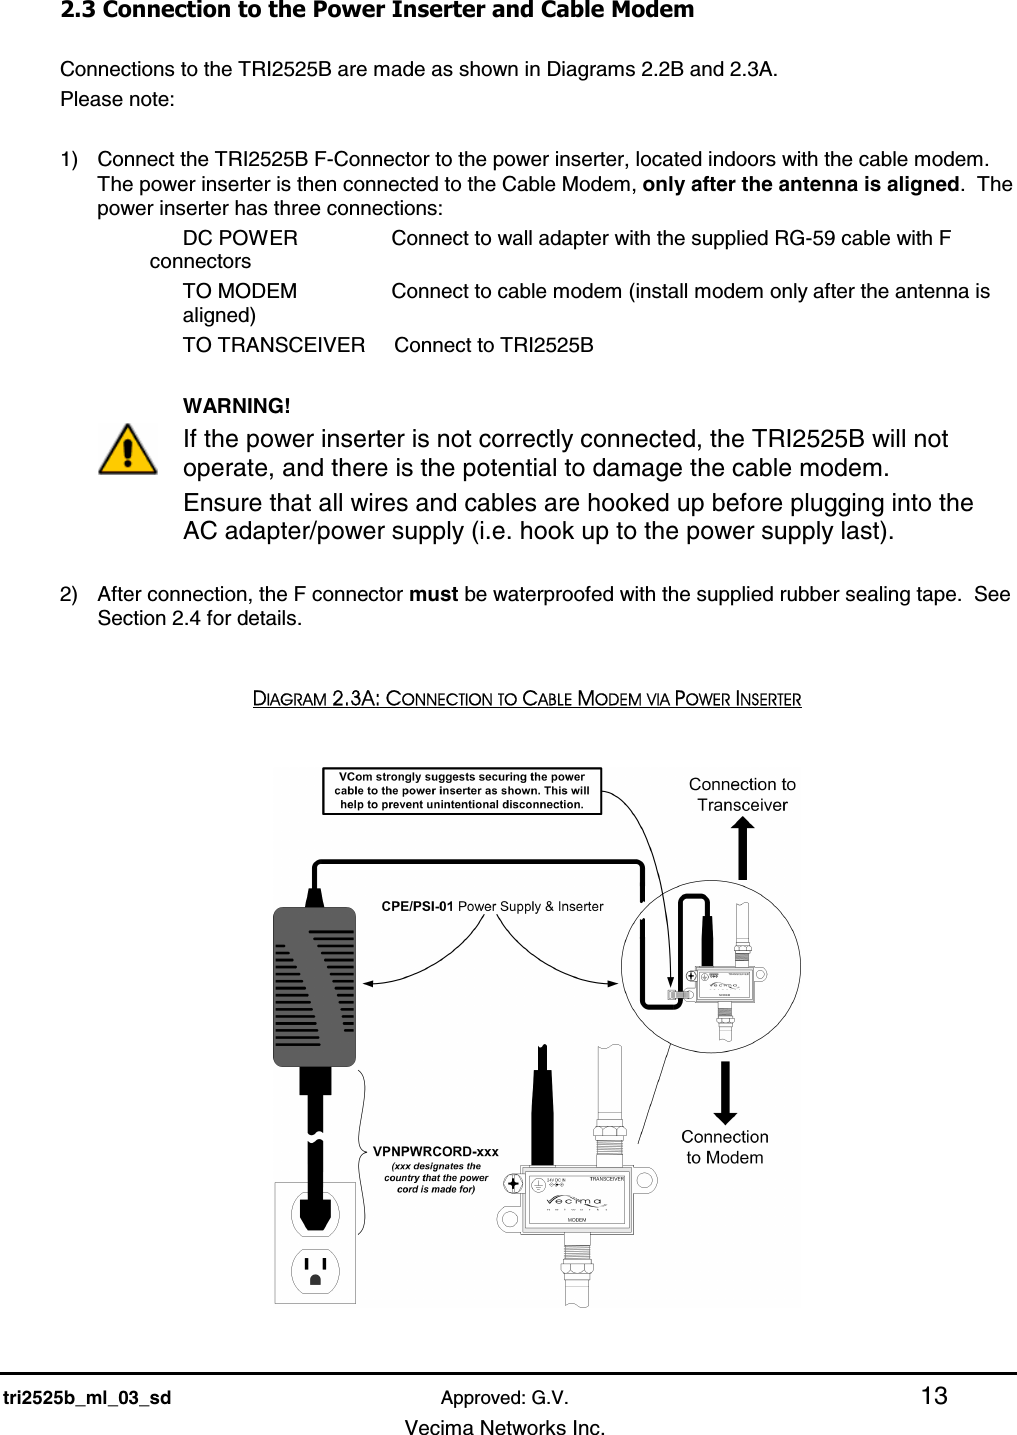    tri2525b_ml_03_sd Approved: G.V. 13   Vecima Networks Inc. 2.3 Connection to the Power Inserter and Cable Modem  Connections to the TRI2525B are made as shown in Diagrams 2.2B and 2.3A.   Please note:  1)  Connect the TRI2525B F-Connector to the power inserter, located indoors with the cable modem. The power inserter is then connected to the Cable Modem, only after the antenna is aligned.  The power inserter has three connections: DC POWER       Connect to wall adapter with the supplied RG-59 cable with F connectors TO MODEM       Connect to cable modem (install modem only after the antenna is aligned) TO TRANSCEIVER     Connect to TRI2525B         WARNING! If the power inserter is not correctly connected, the TRI2525B will not operate, and there is the potential to damage the cable modem.   Ensure that all wires and cables are hooked up before plugging into the AC adapter/power supply (i.e. hook up to the power supply last).  2)  After connection, the F connector must be waterproofed with the supplied rubber sealing tape.  See Section 2.4 for details.  DIAGRAM 2.3A: CONNECTION TO CABLE MODEM VIA POWER INSERTER   